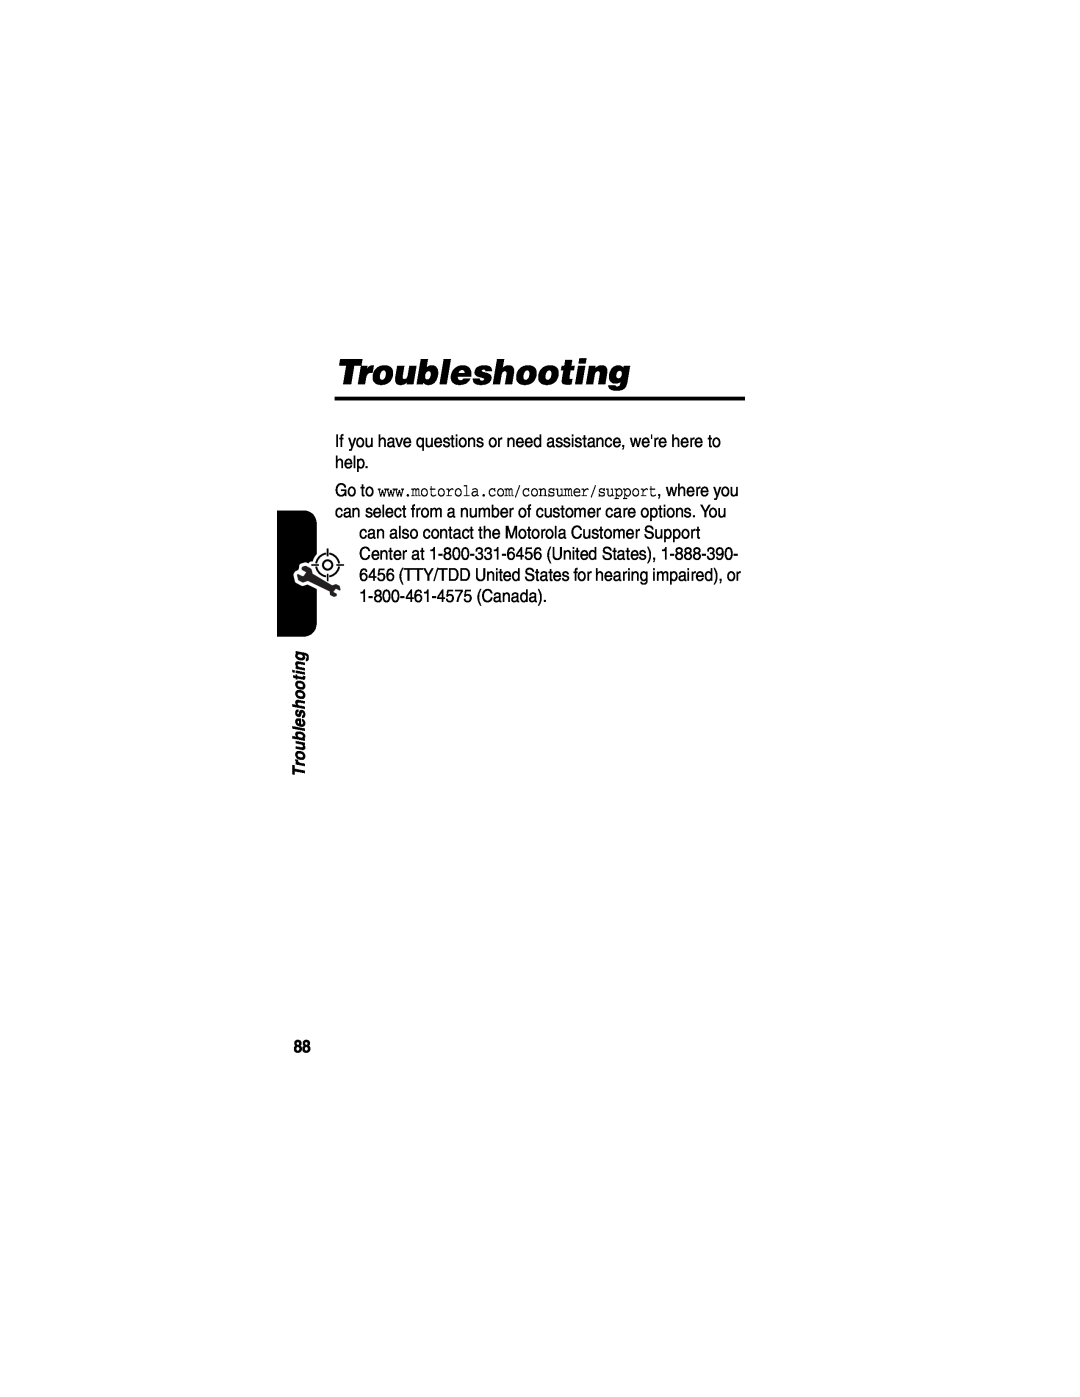 Motorola V551SLVATT manual Troubleshooting, If you have questions or need assistance, were here to help 